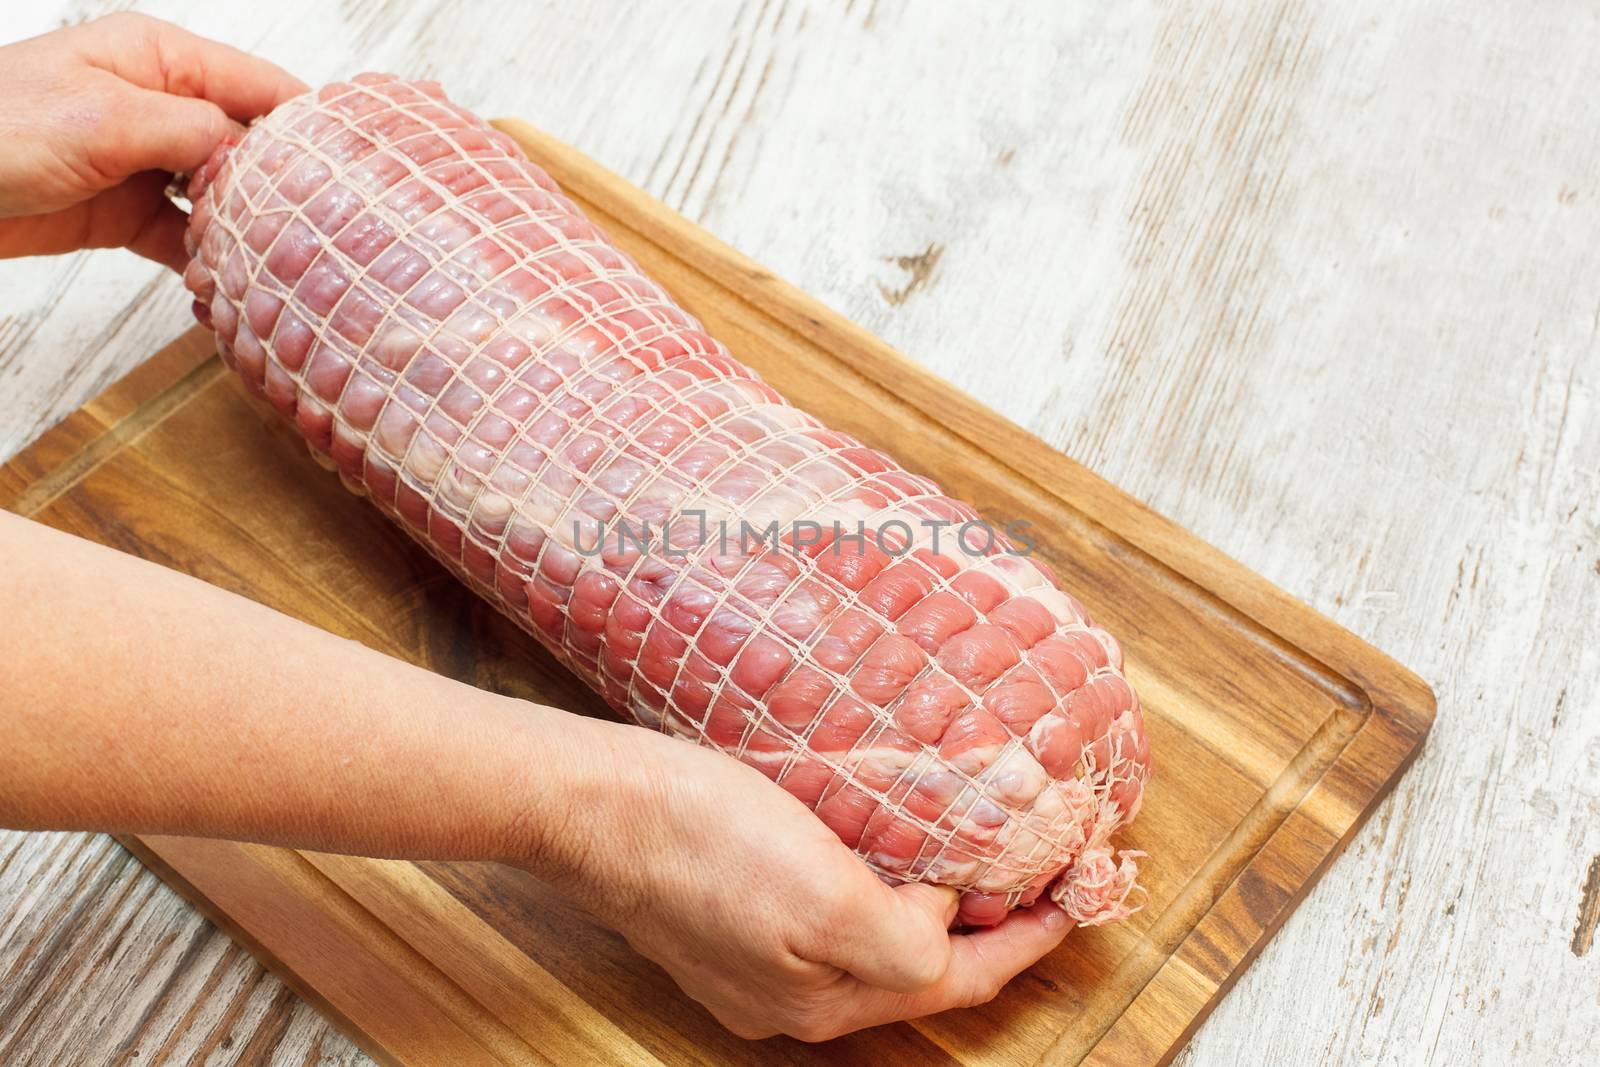 Stuffed Veal Roulade, tied up with rope , ready to barbecue. Raw rolled meat enclosed in tied netting. Copy space composition. Viewed from above